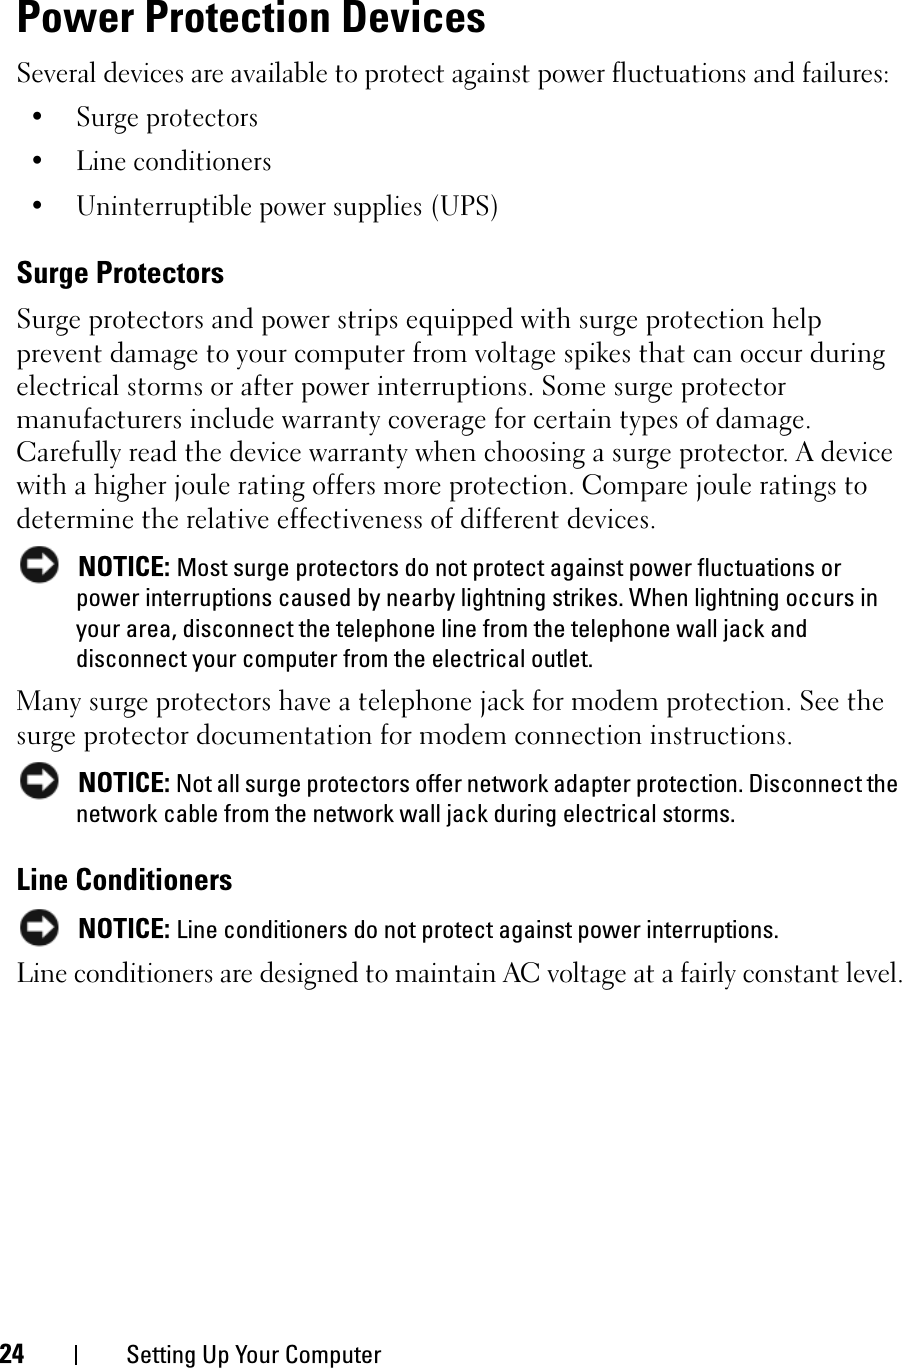 24 Setting Up Your ComputerPower Protection DevicesSeveral devices are available to protect against power fluctuations and failures:• Surge protectors• Line conditioners• Uninterruptible power supplies (UPS)Surge ProtectorsSurge protectors and power strips equipped with surge protection help prevent damage to your computer from voltage spikes that can occur during electrical storms or after power interruptions. Some surge protector manufacturers include warranty coverage for certain types of damage. Carefully read the device warranty when choosing a surge protector. A device with a higher joule rating offers more protection. Compare joule ratings to determine the relative effectiveness of different devices.NOTICE: Most surge protectors do not protect against power fluctuations or power interruptions caused by nearby lightning strikes. When lightning occurs in your area, disconnect the telephone line from the telephone wall jack and disconnect your computer from the electrical outlet.Many surge protectors have a telephone jack for modem protection. See the surge protector documentation for modem connection instructions.NOTICE: Not all surge protectors offer network adapter protection. Disconnect the network cable from the network wall jack during electrical storms.Line ConditionersNOTICE: Line conditioners do not protect against power interruptions.Line conditioners are designed to maintain AC voltage at a fairly constant level.